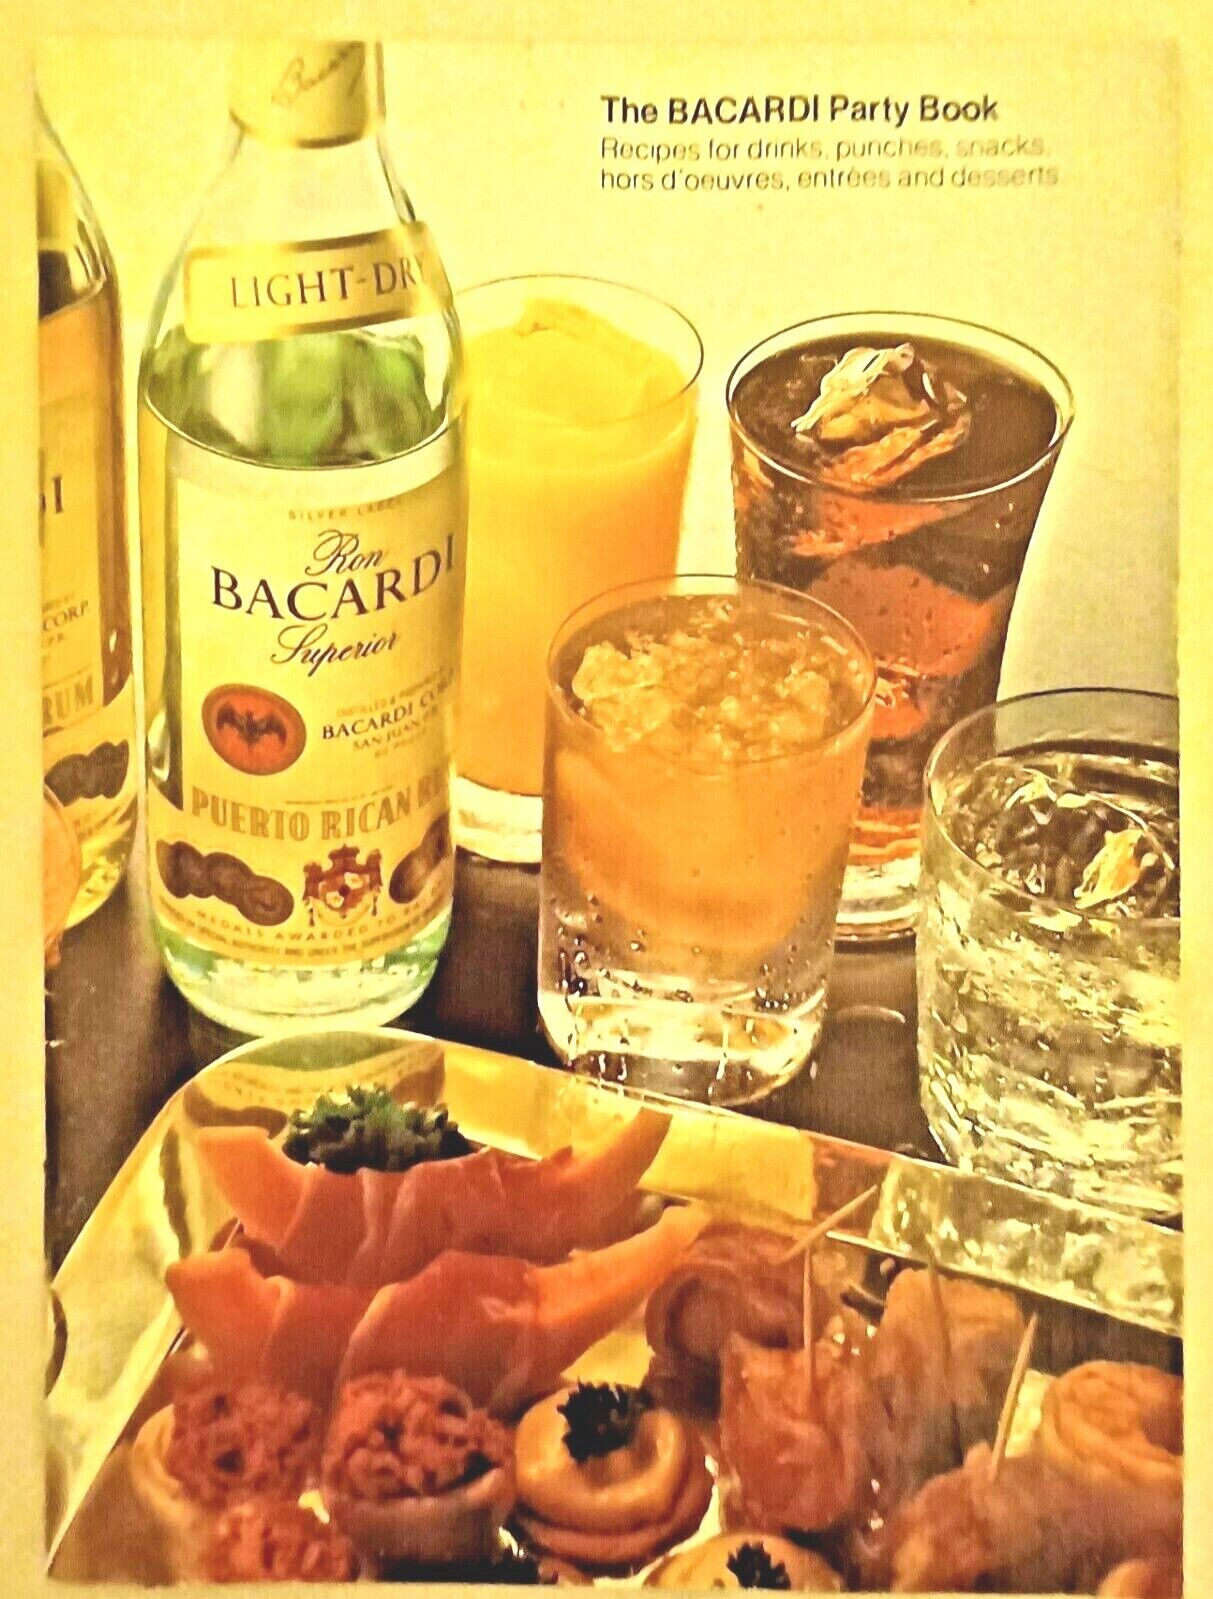 The Bacardi Party Book Recipes-drinks, Punches, Snacks